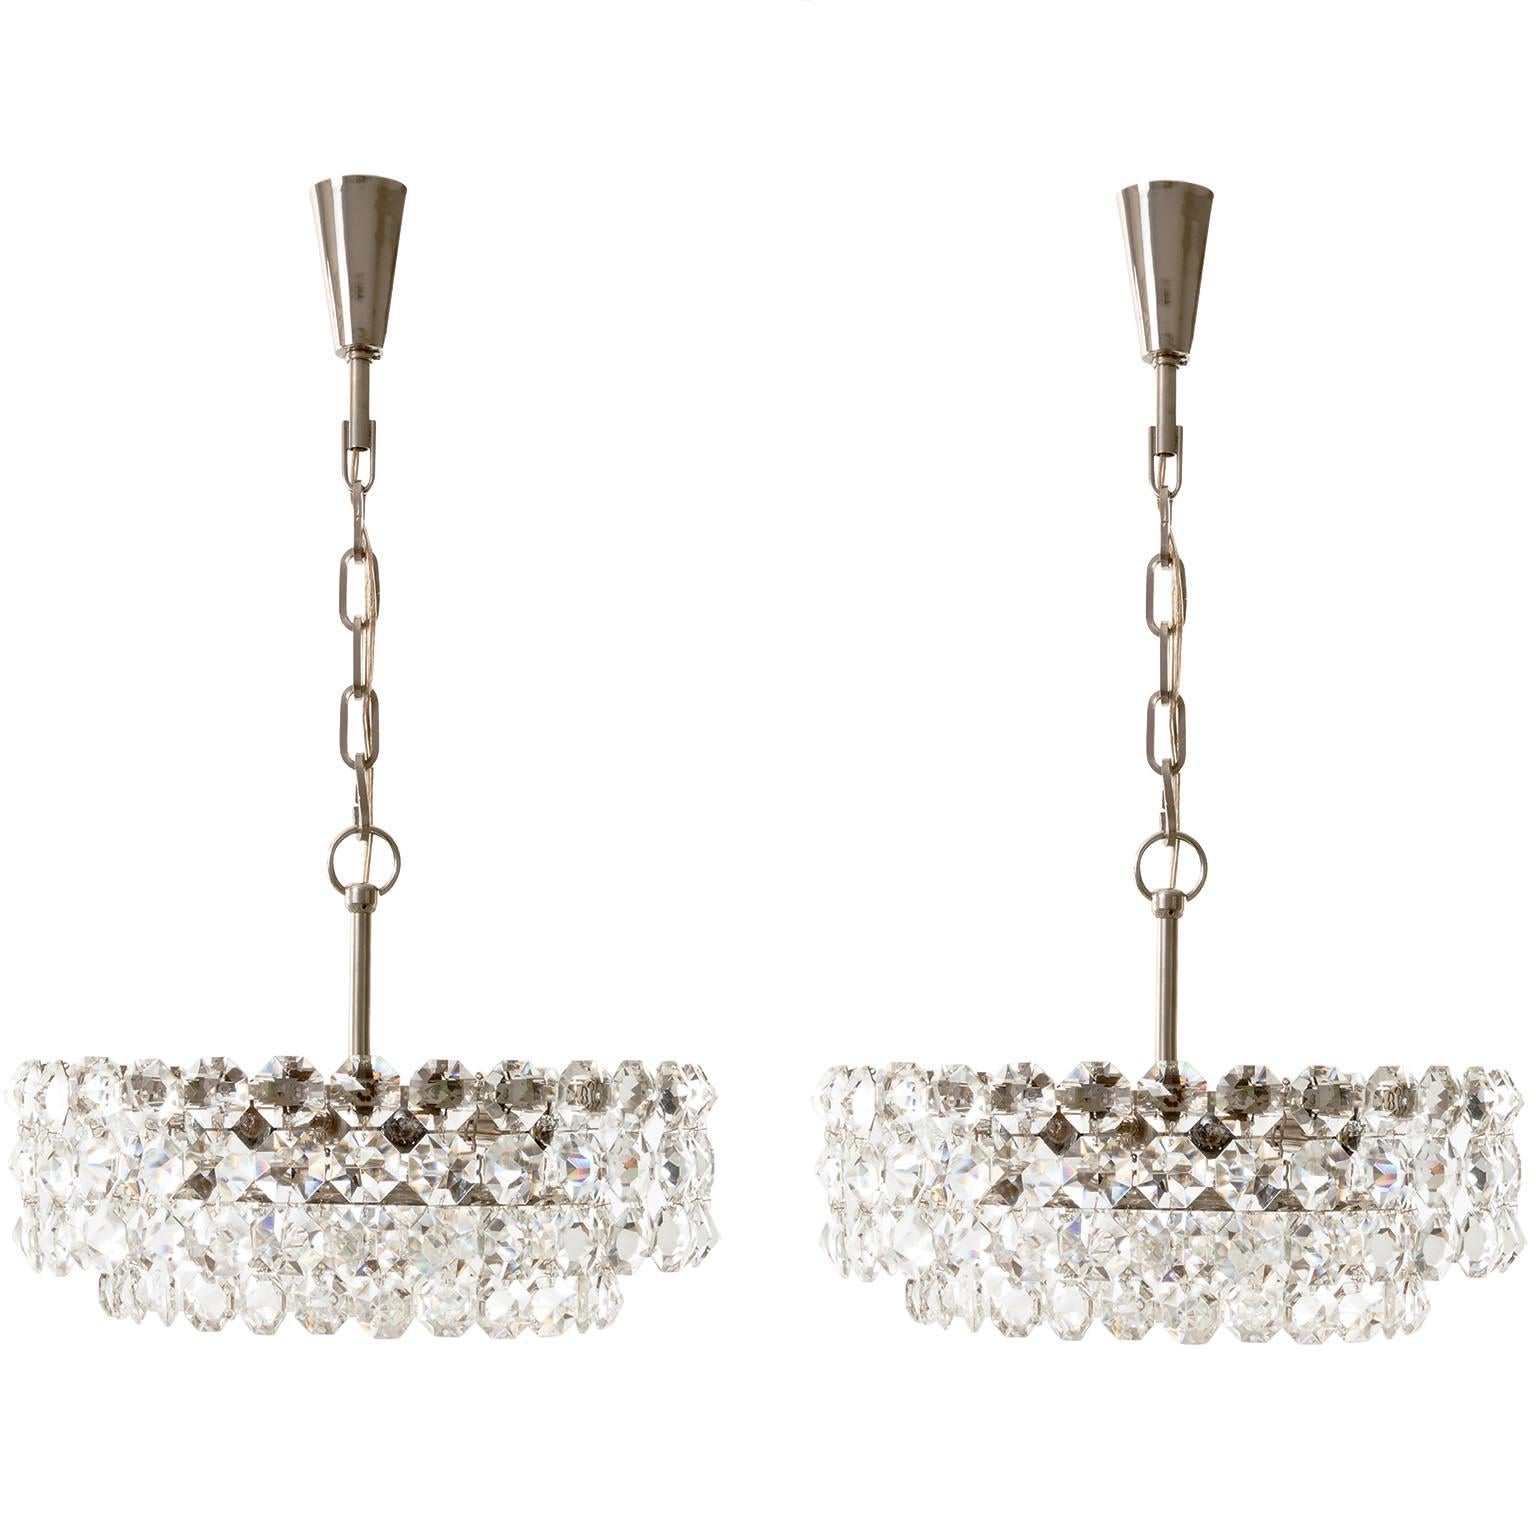 One of Two Bakalowits Chandeliers Pendant Lights, Nickel Glass, 1960s